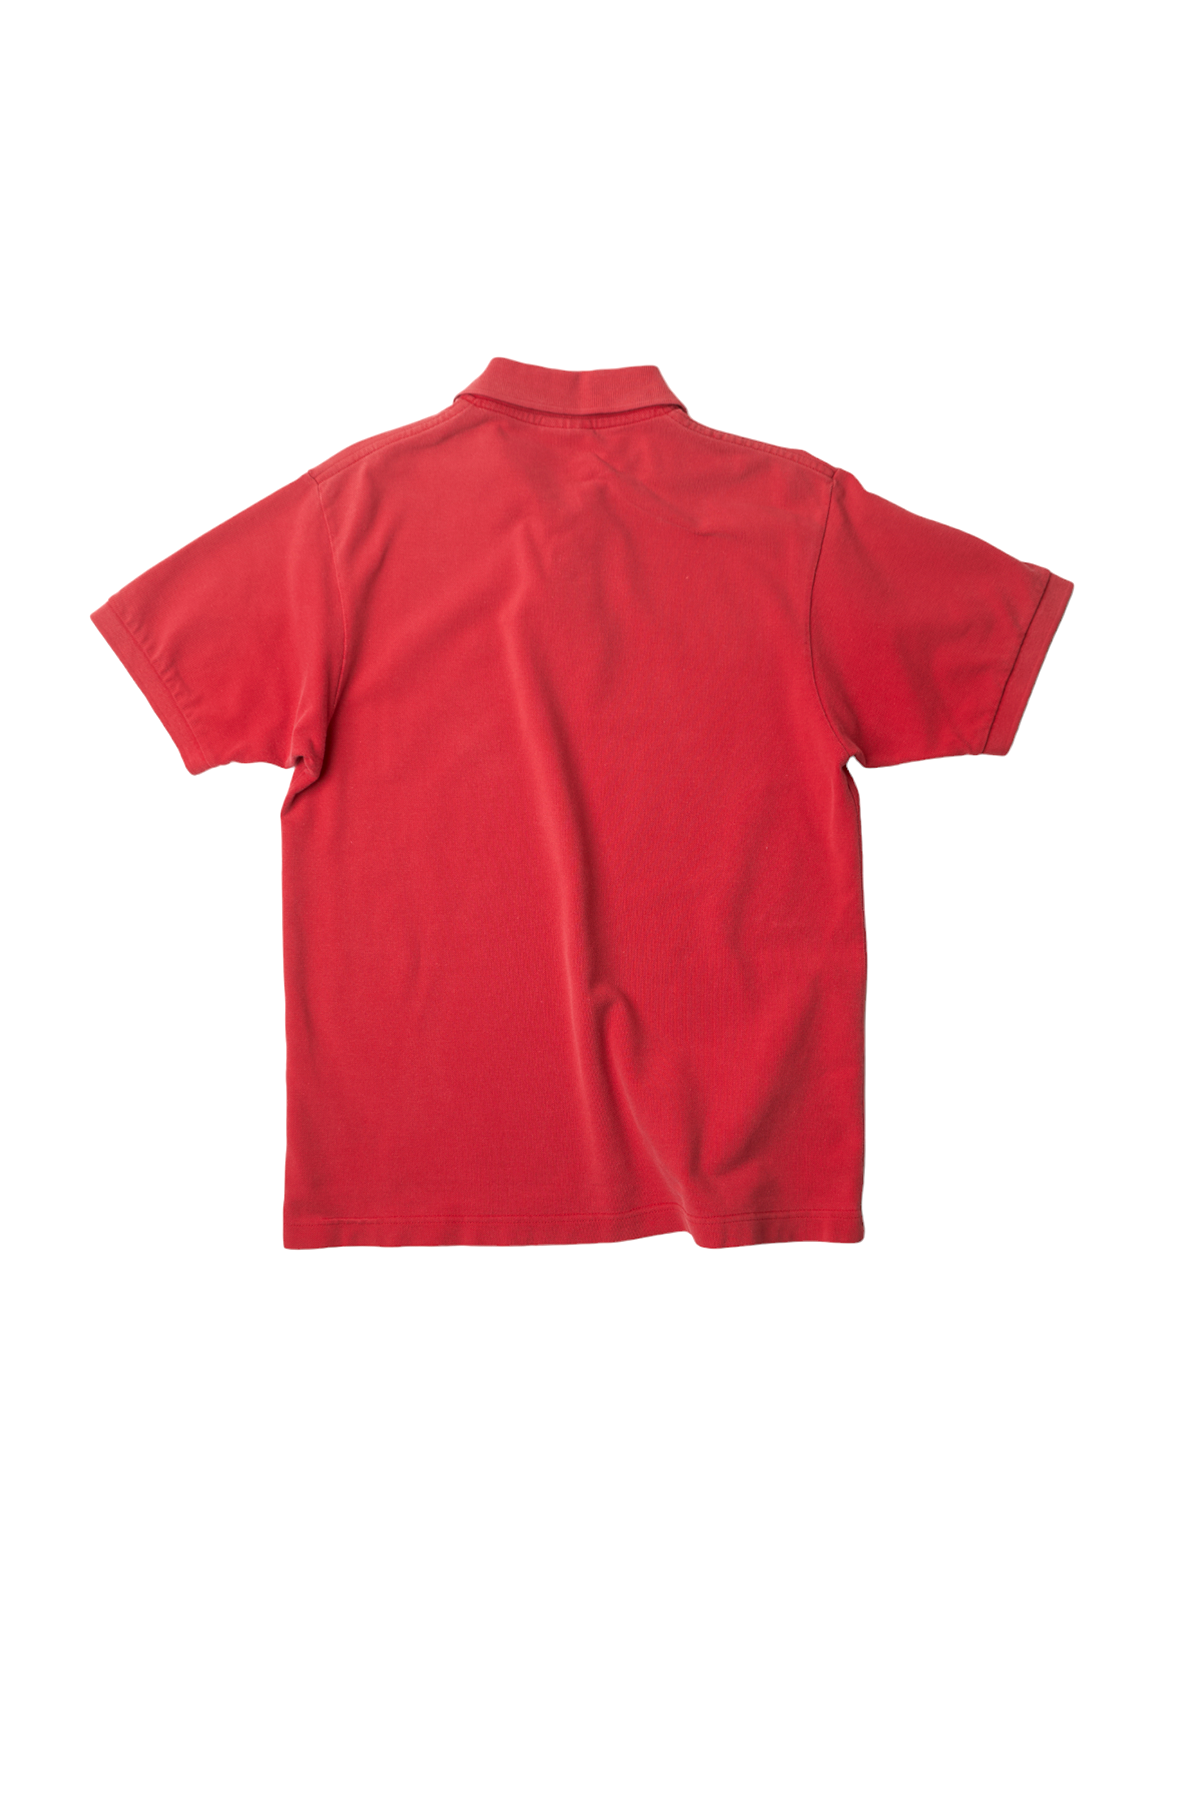 VINTAGE POLO| lacoste sunbleached red